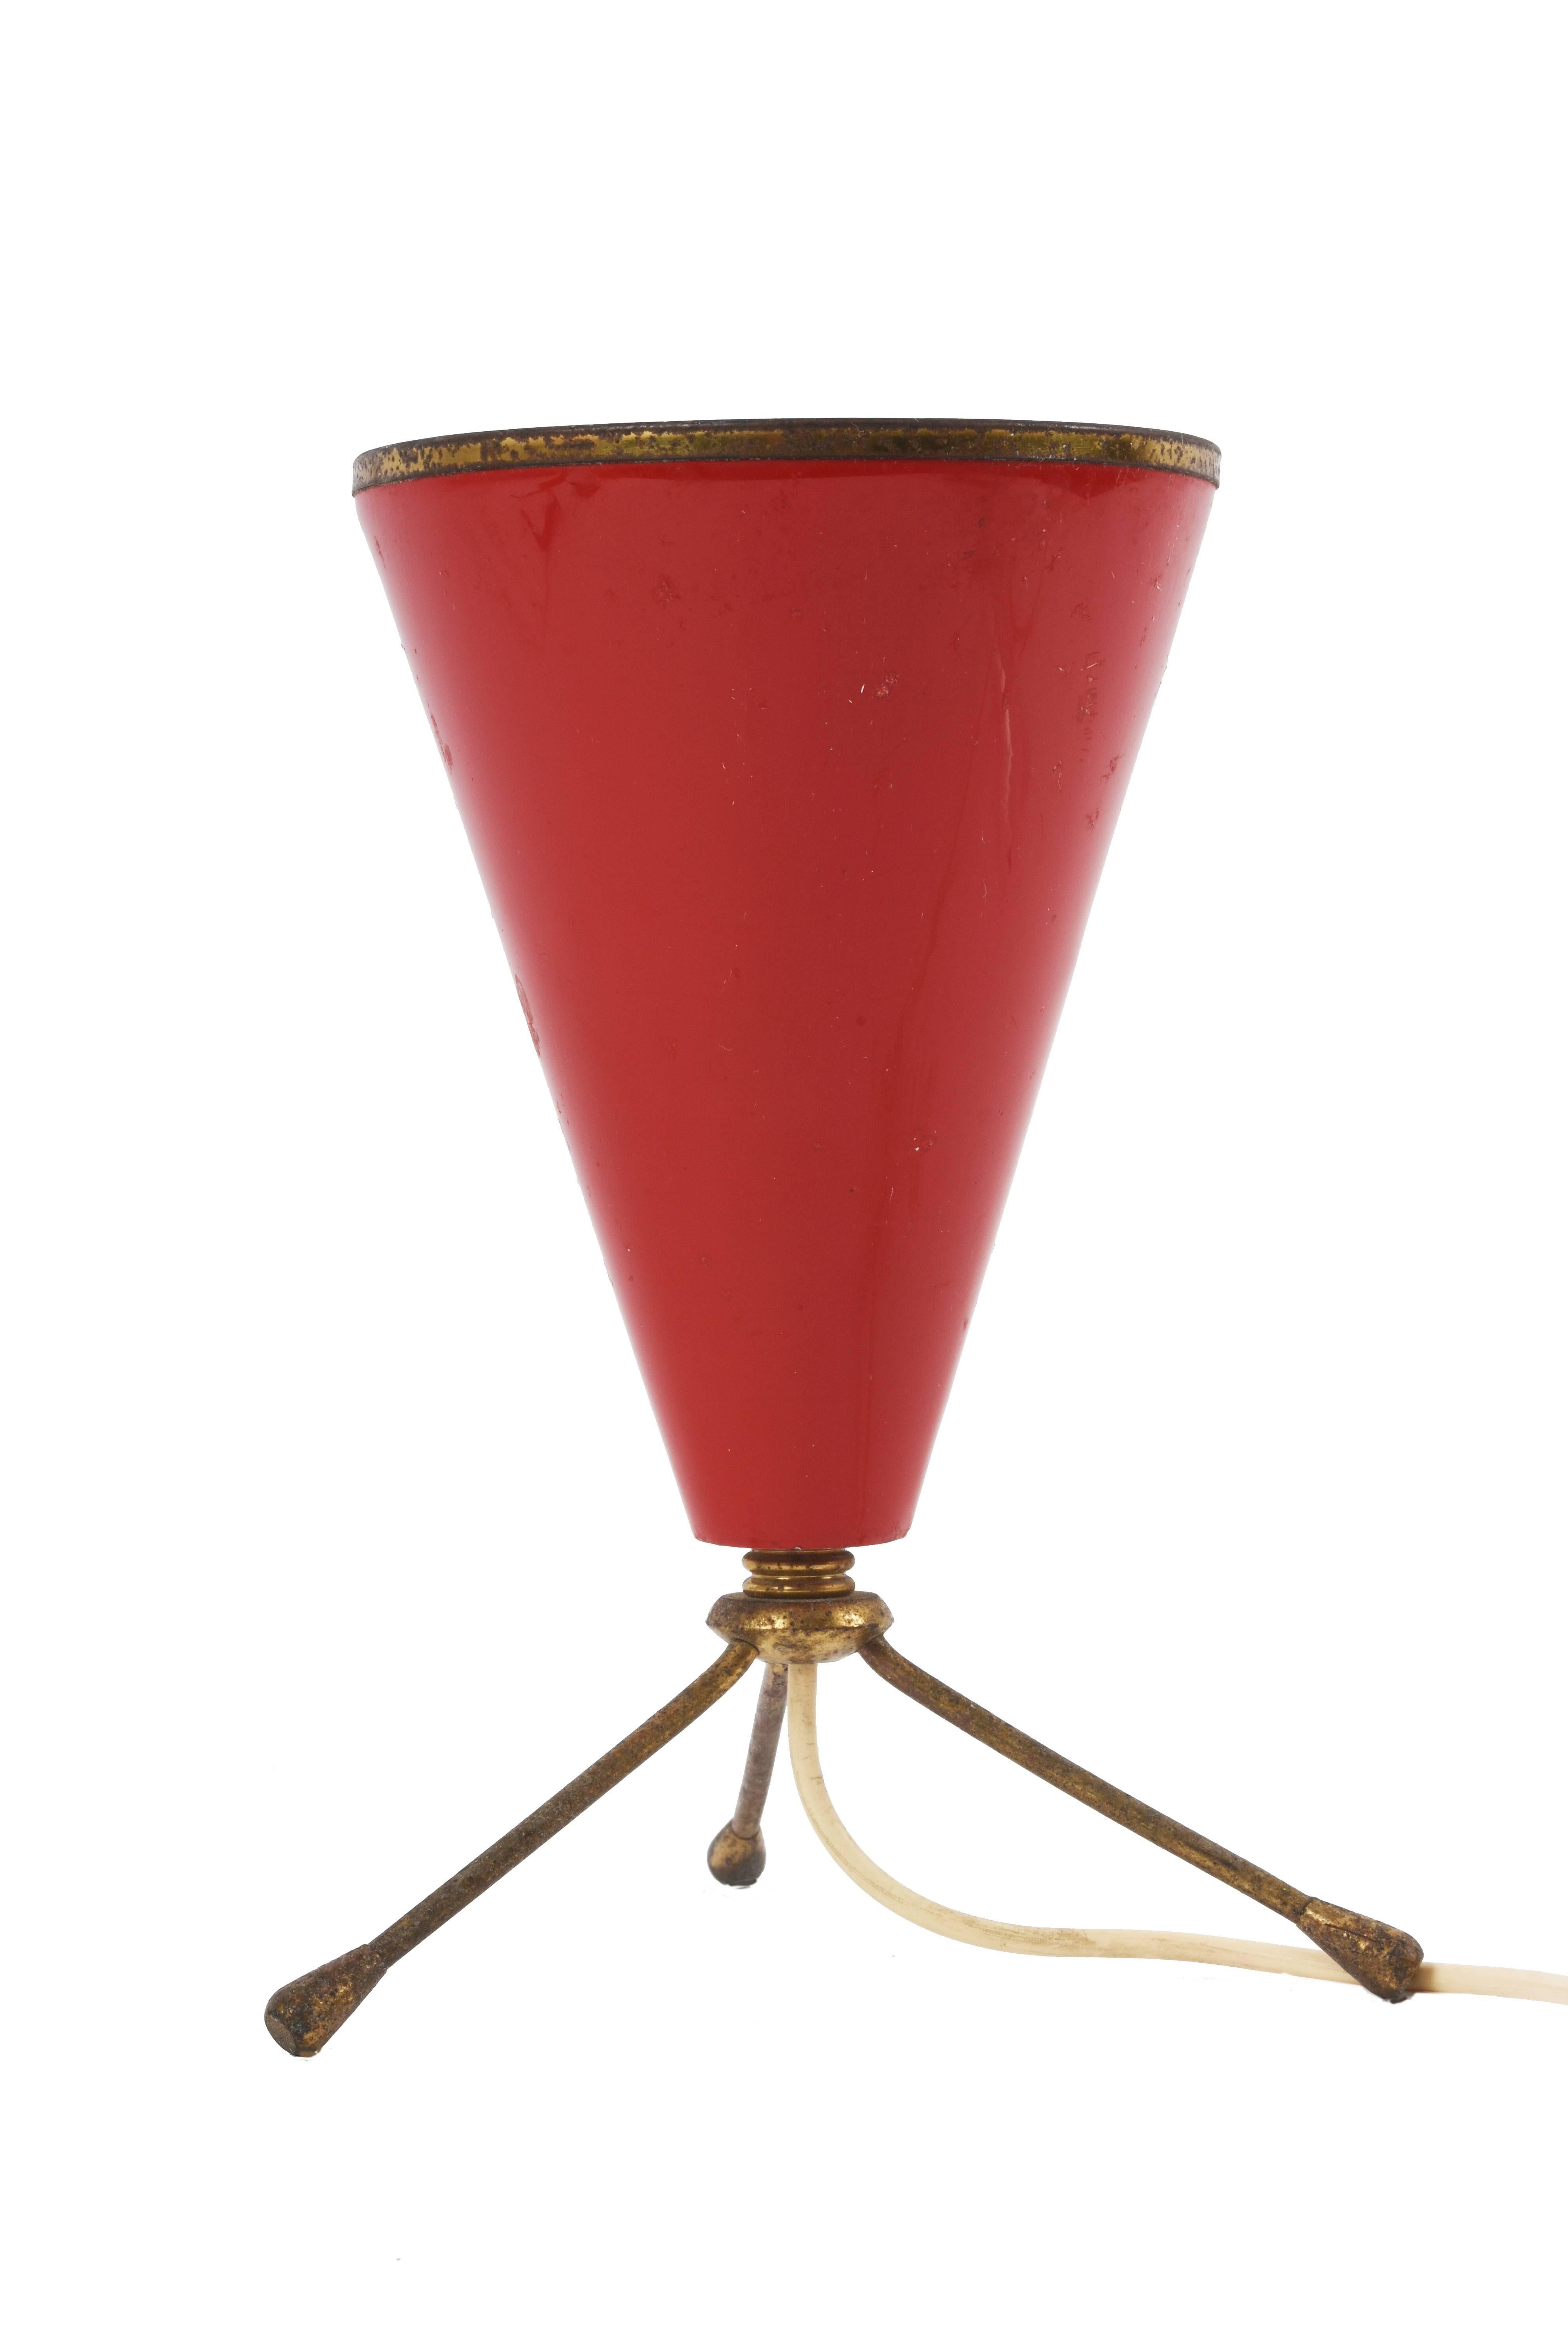 20th Century Conical Table Lamp in Red Lacquered Metal and Brass, 1950s Italian Tripode